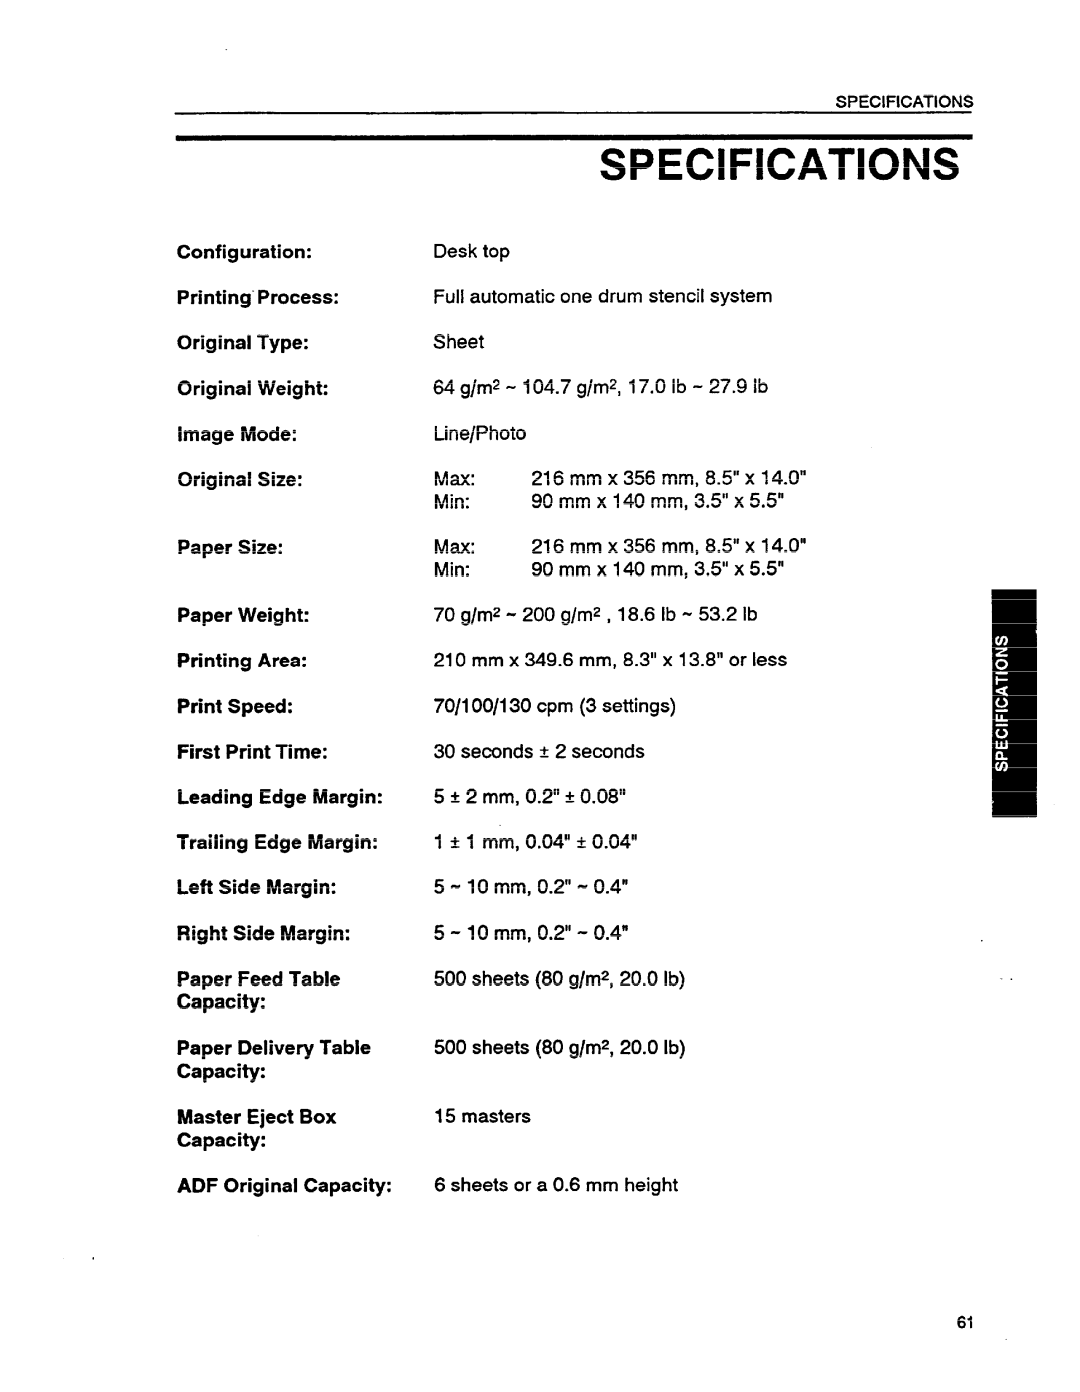 Ricoh VT1730 manual Specifications, 90mmx140 